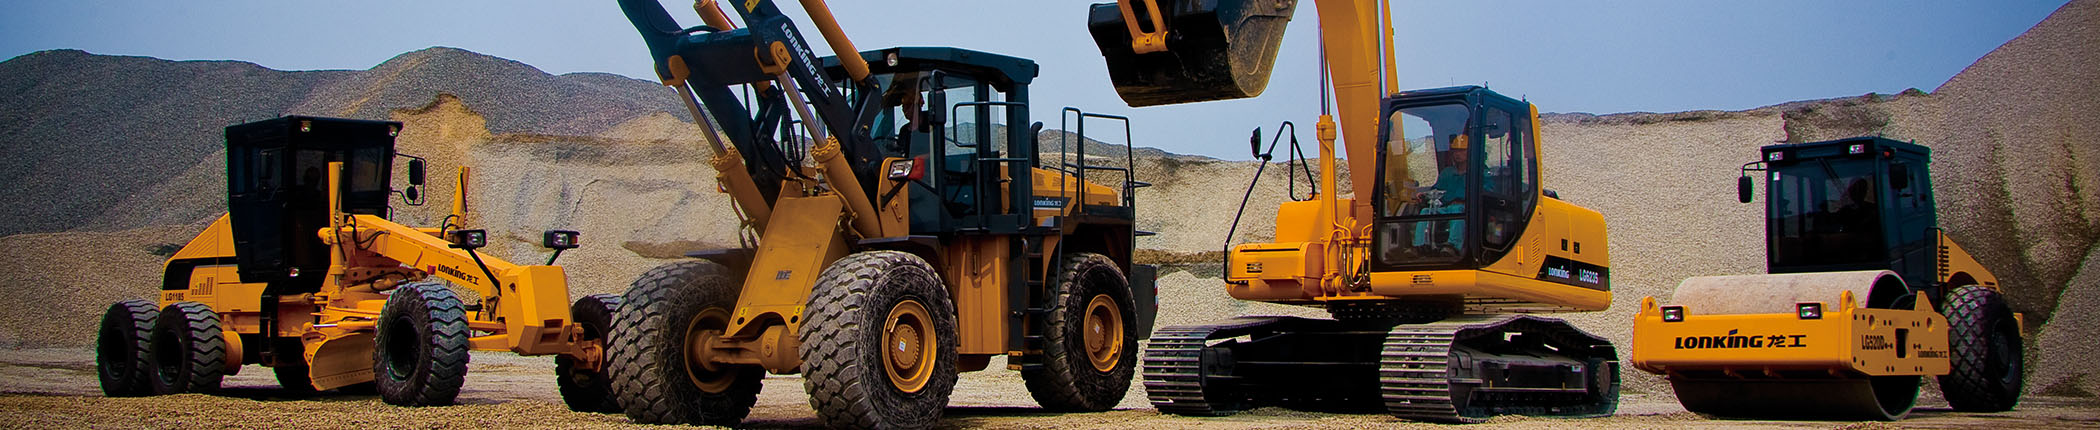 LONKING Wheel Loader، Hydraulic Excavator، Road Roller and Fork lifter